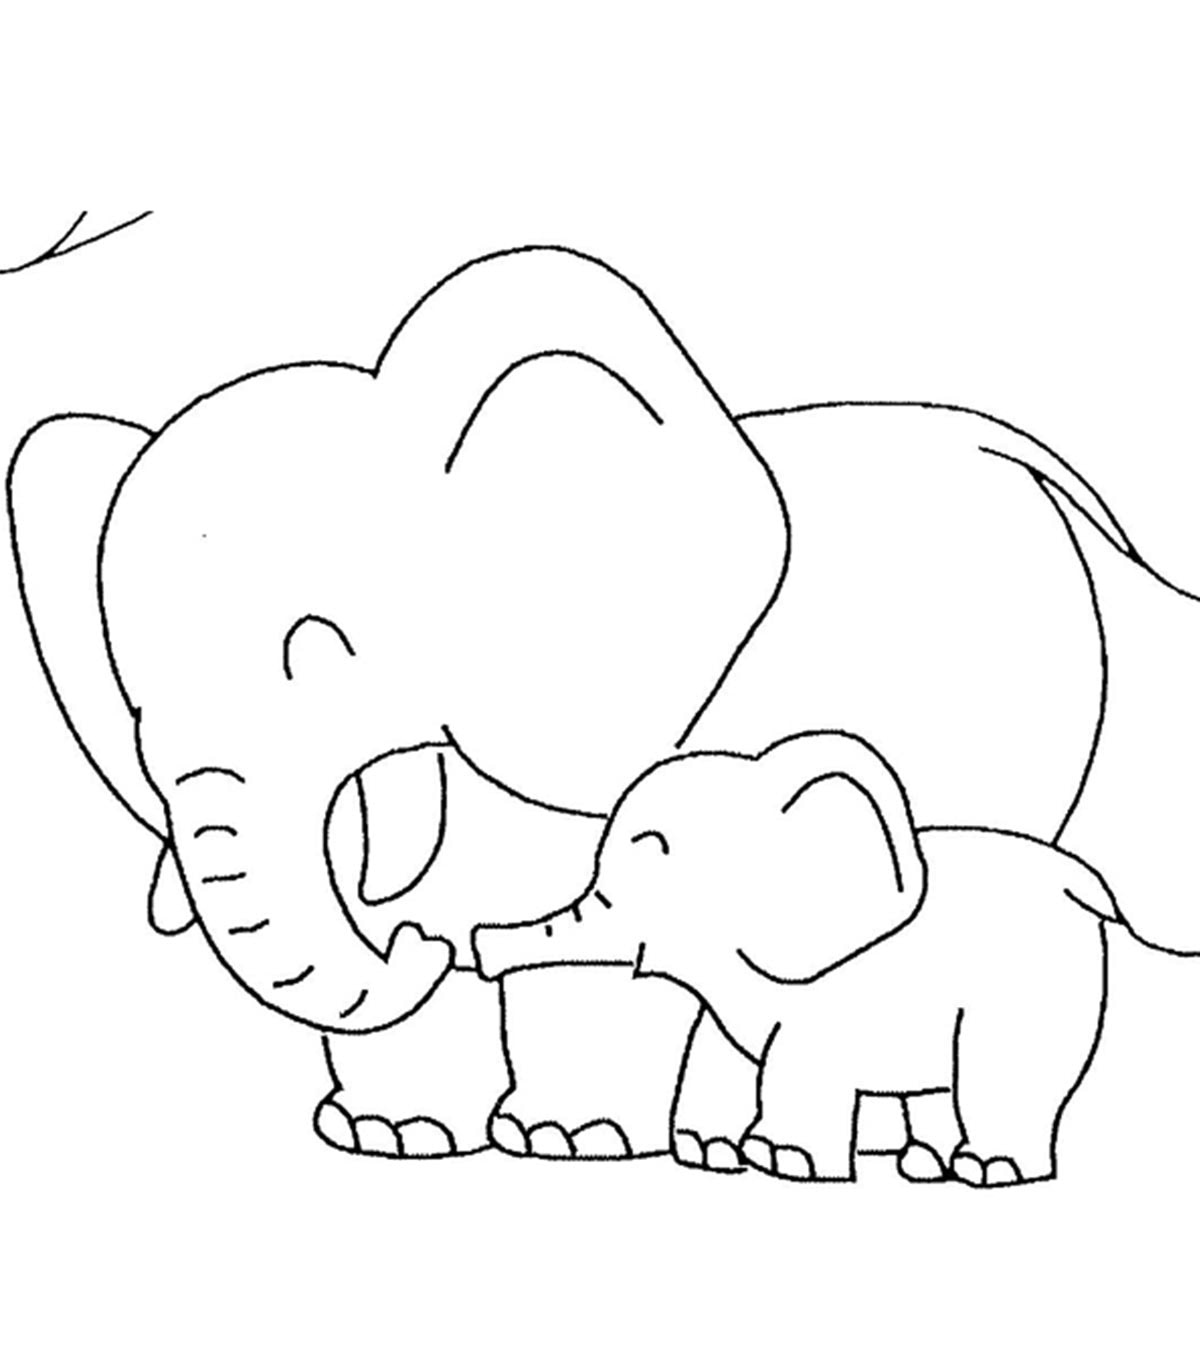 Top 10 Jungle Animals Coloring Pages For Your Naughty Kid_image